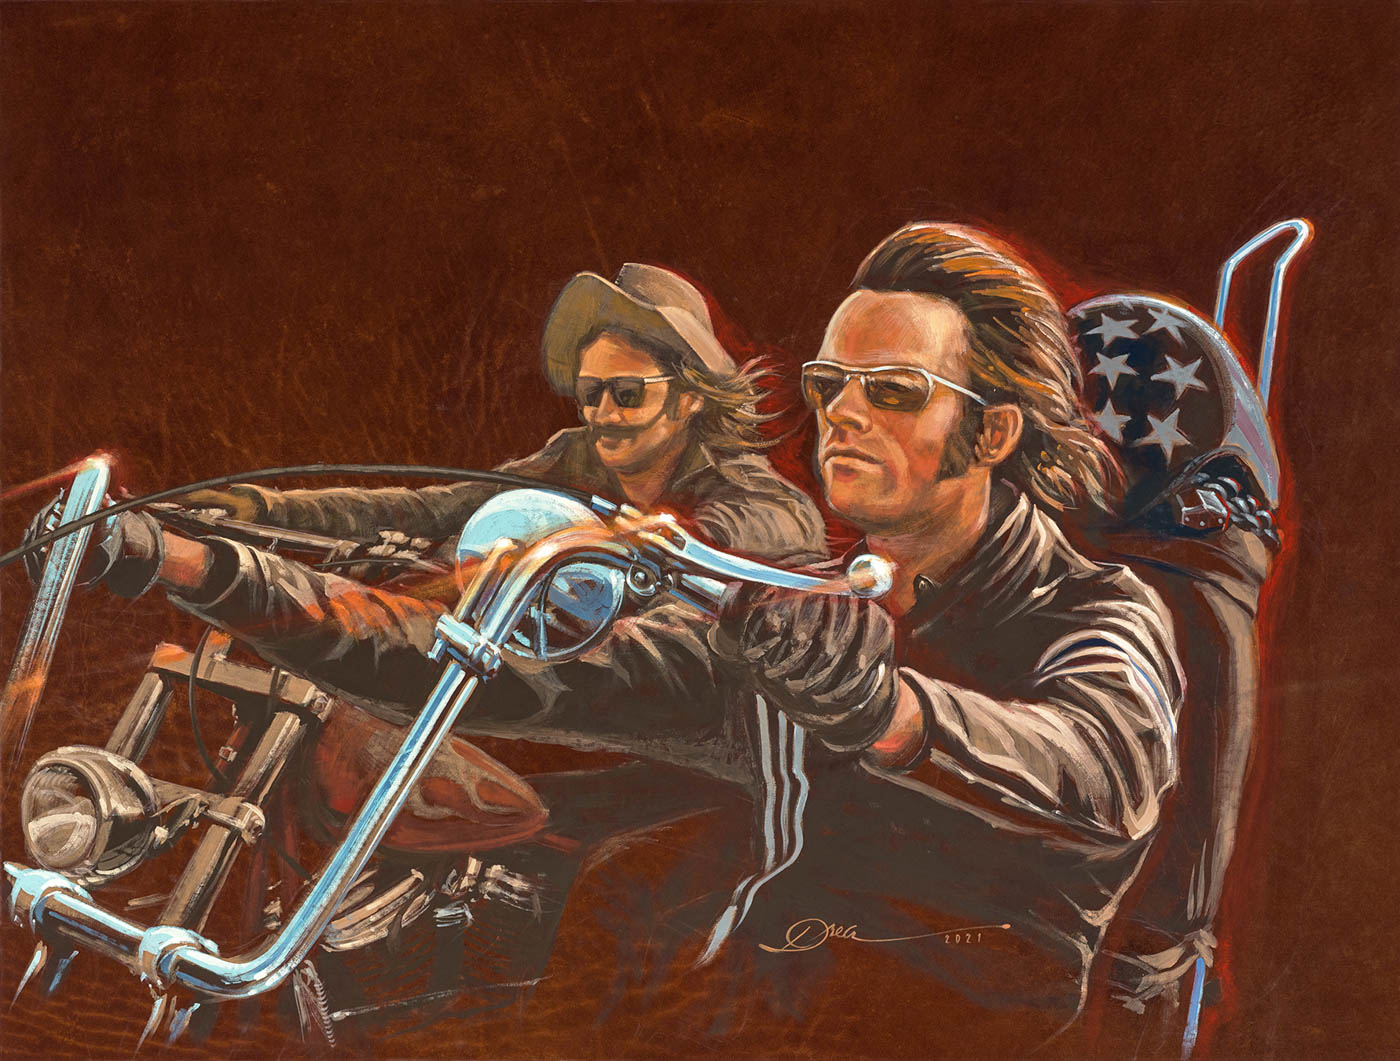 In The Wind – Easy Rider